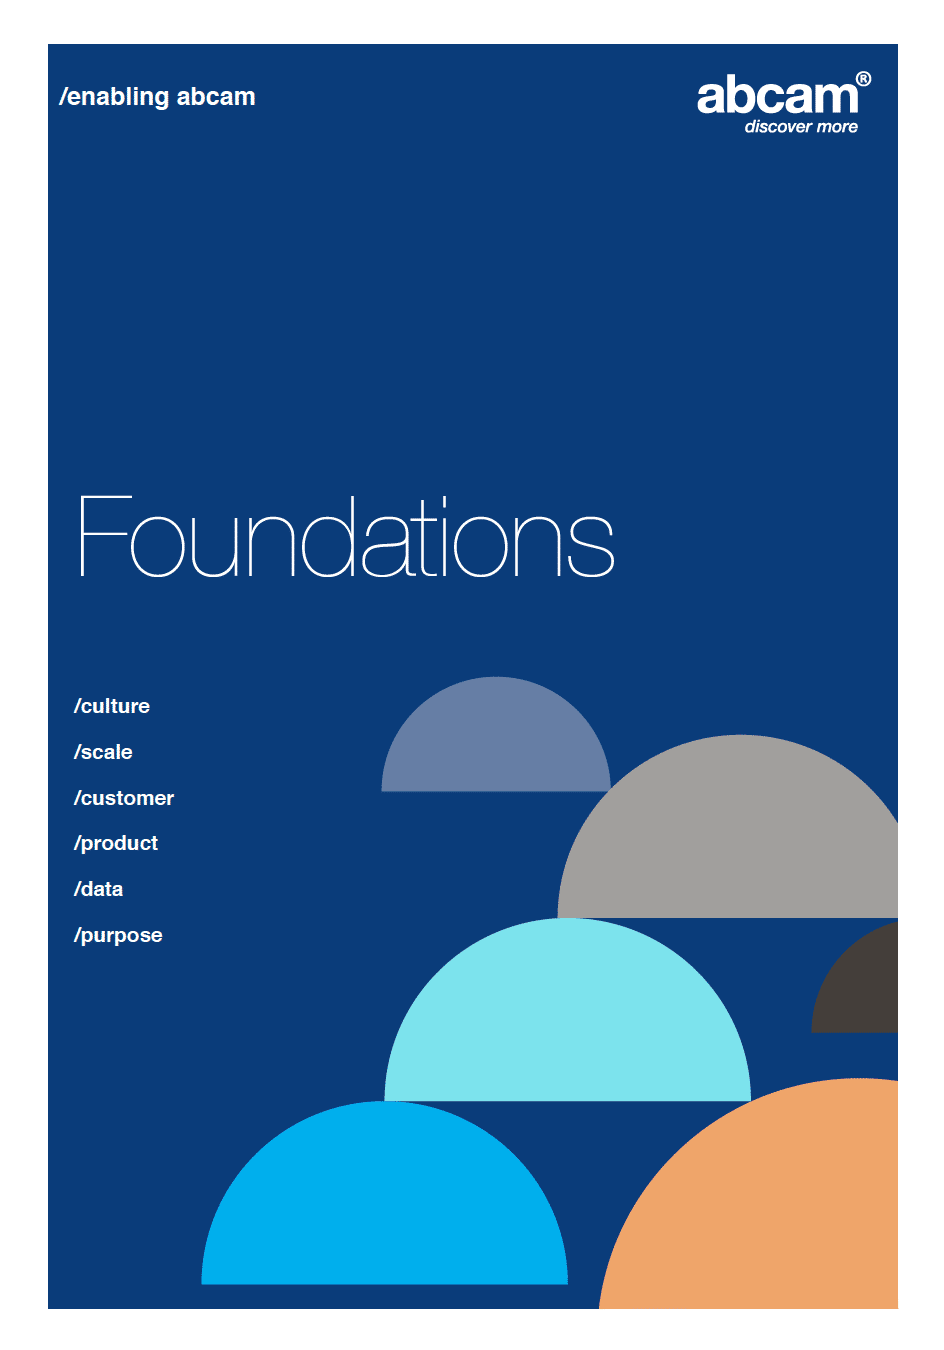 Blue book with title foundations including different semi-circles